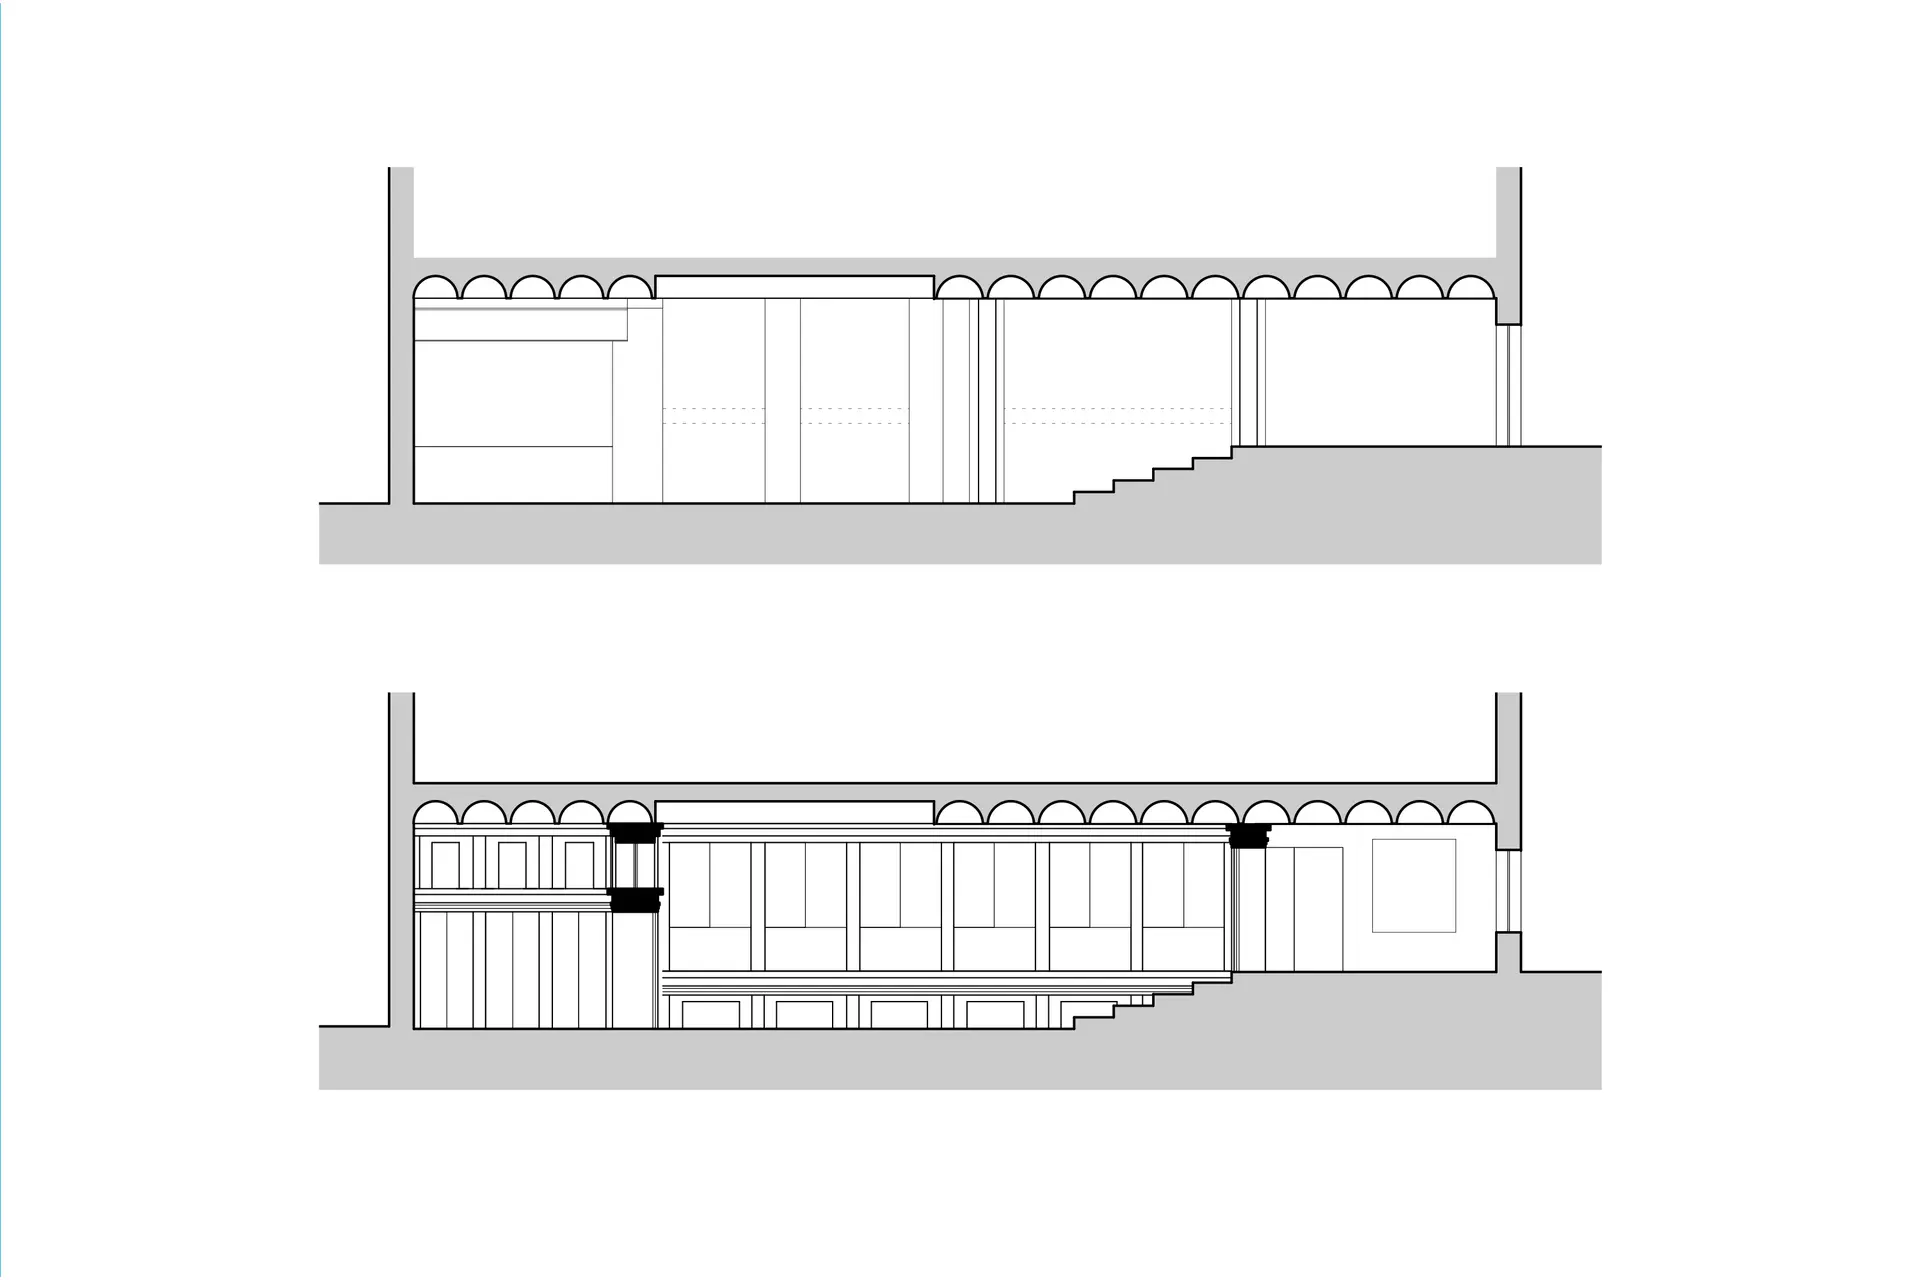 Existing and proposed sections through lecture theatre and ante room